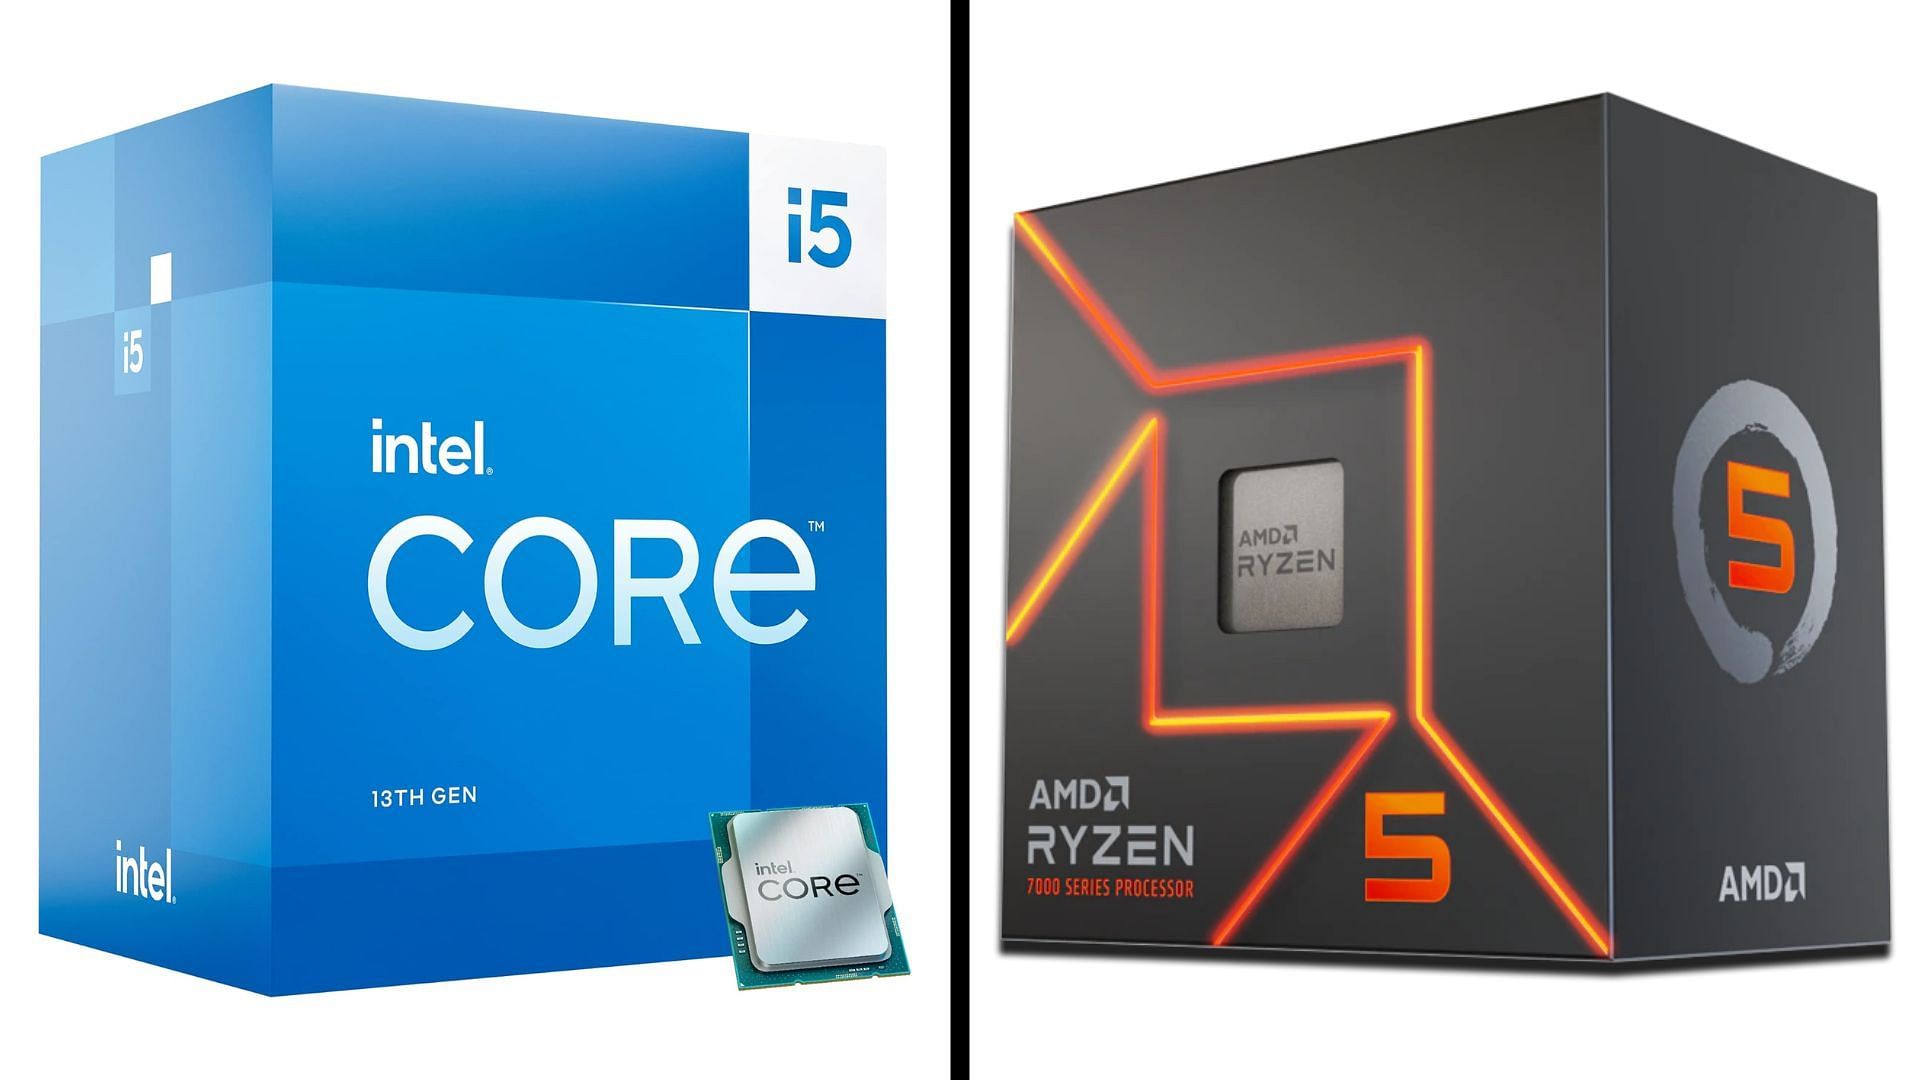 The Intel Core i5-13400 and Ryzen 5 7600 are some of the best mid-range CPUs in the market (Image via Amazon and AMD)